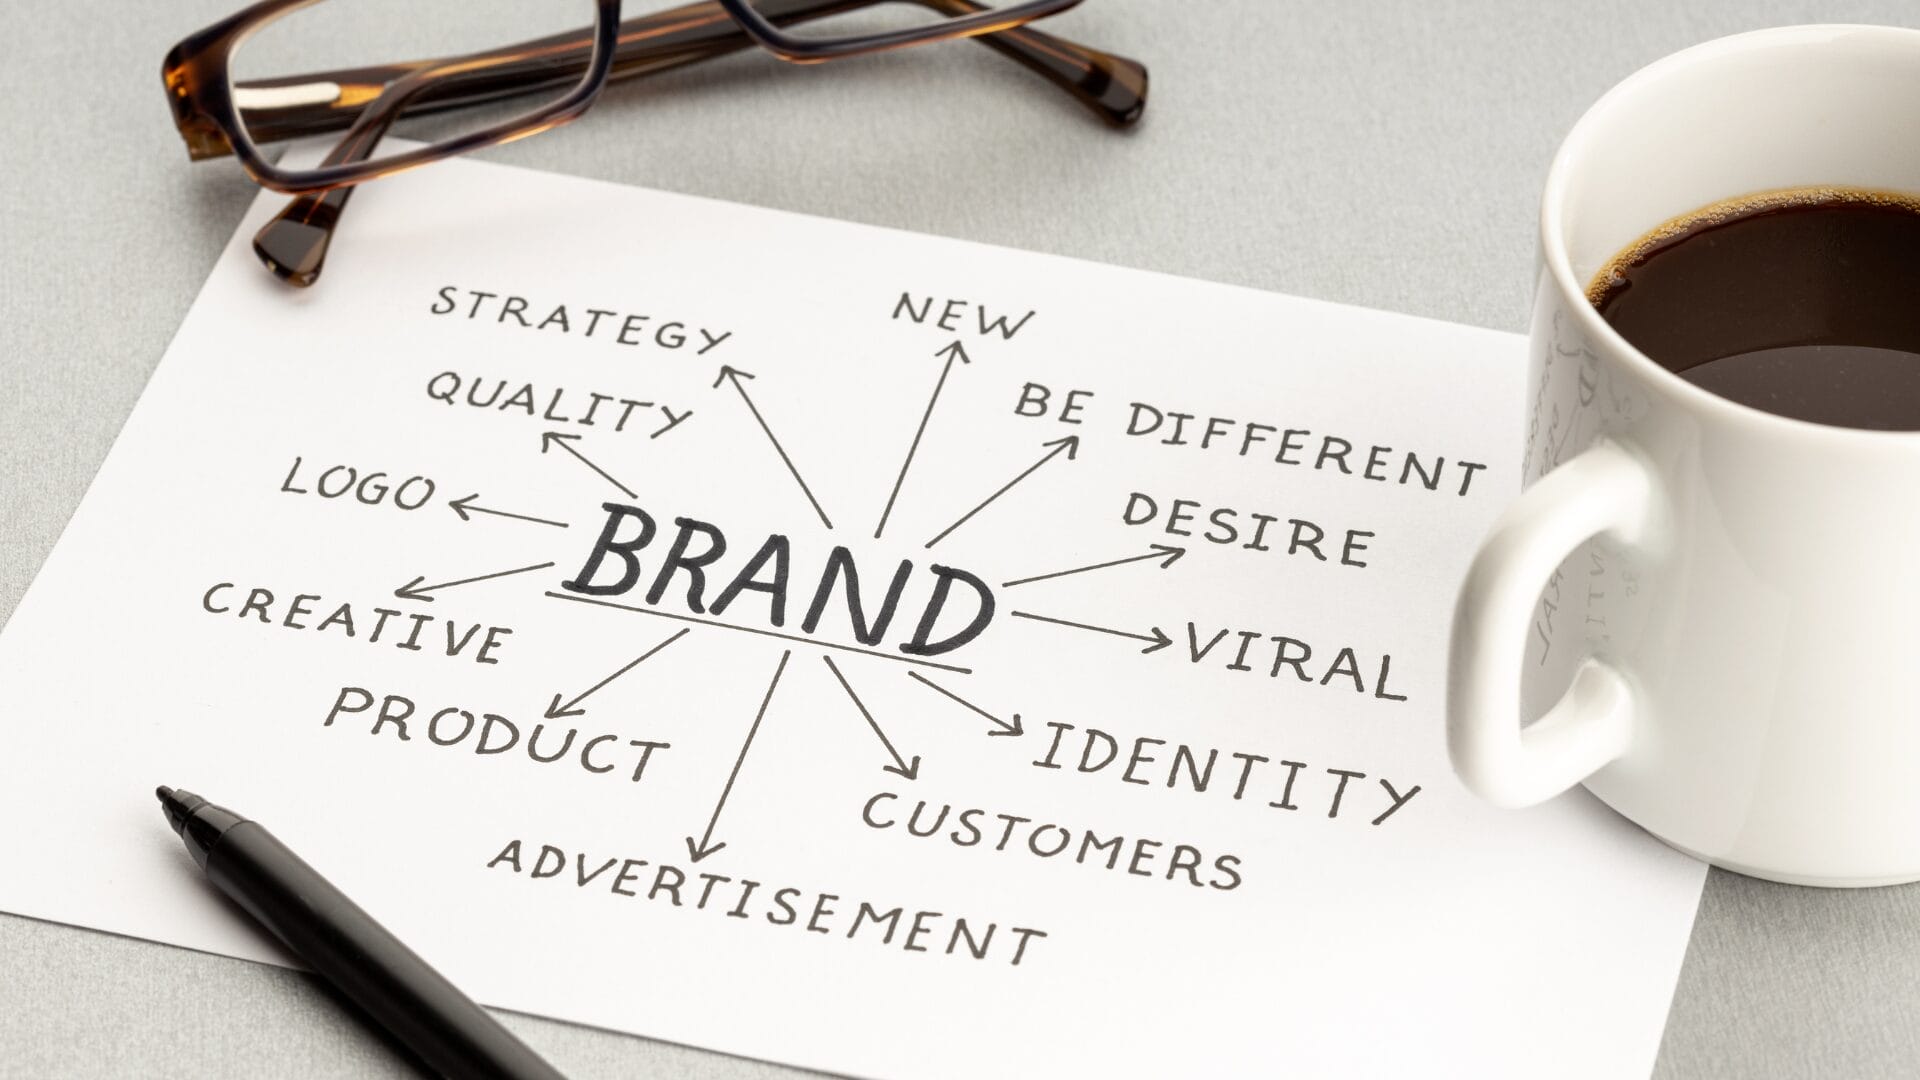 Strategies for Building Your Brand